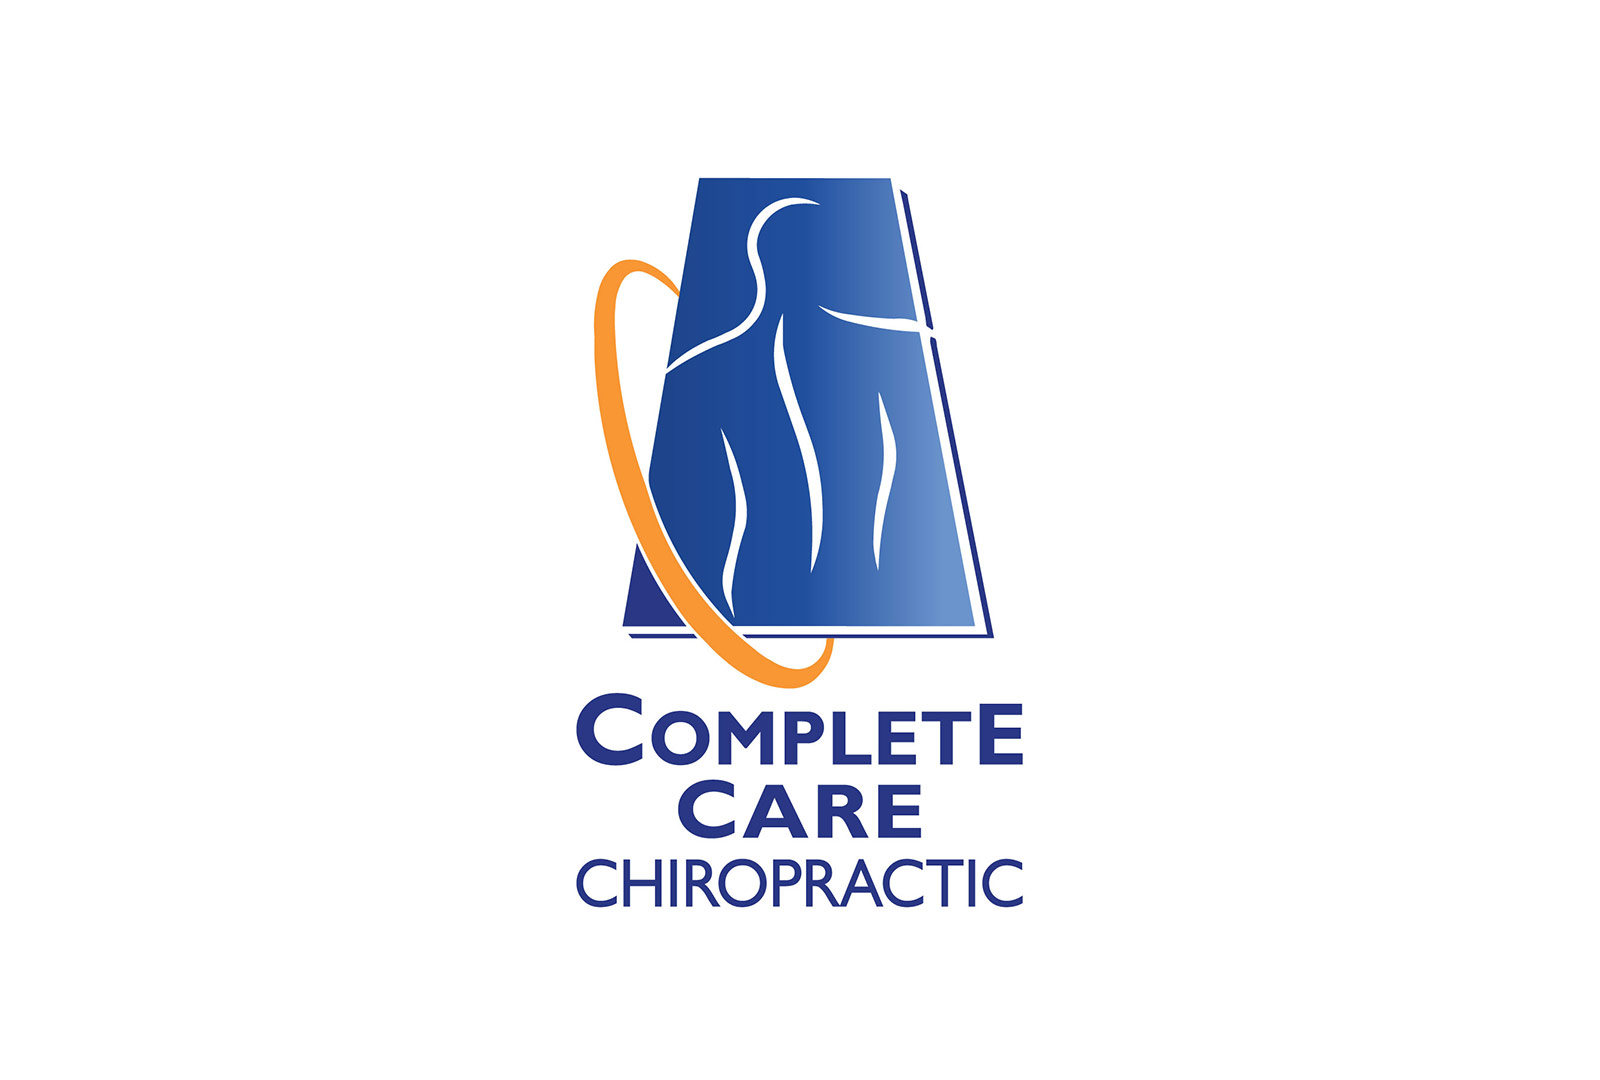  Complete Care Chiropractic 